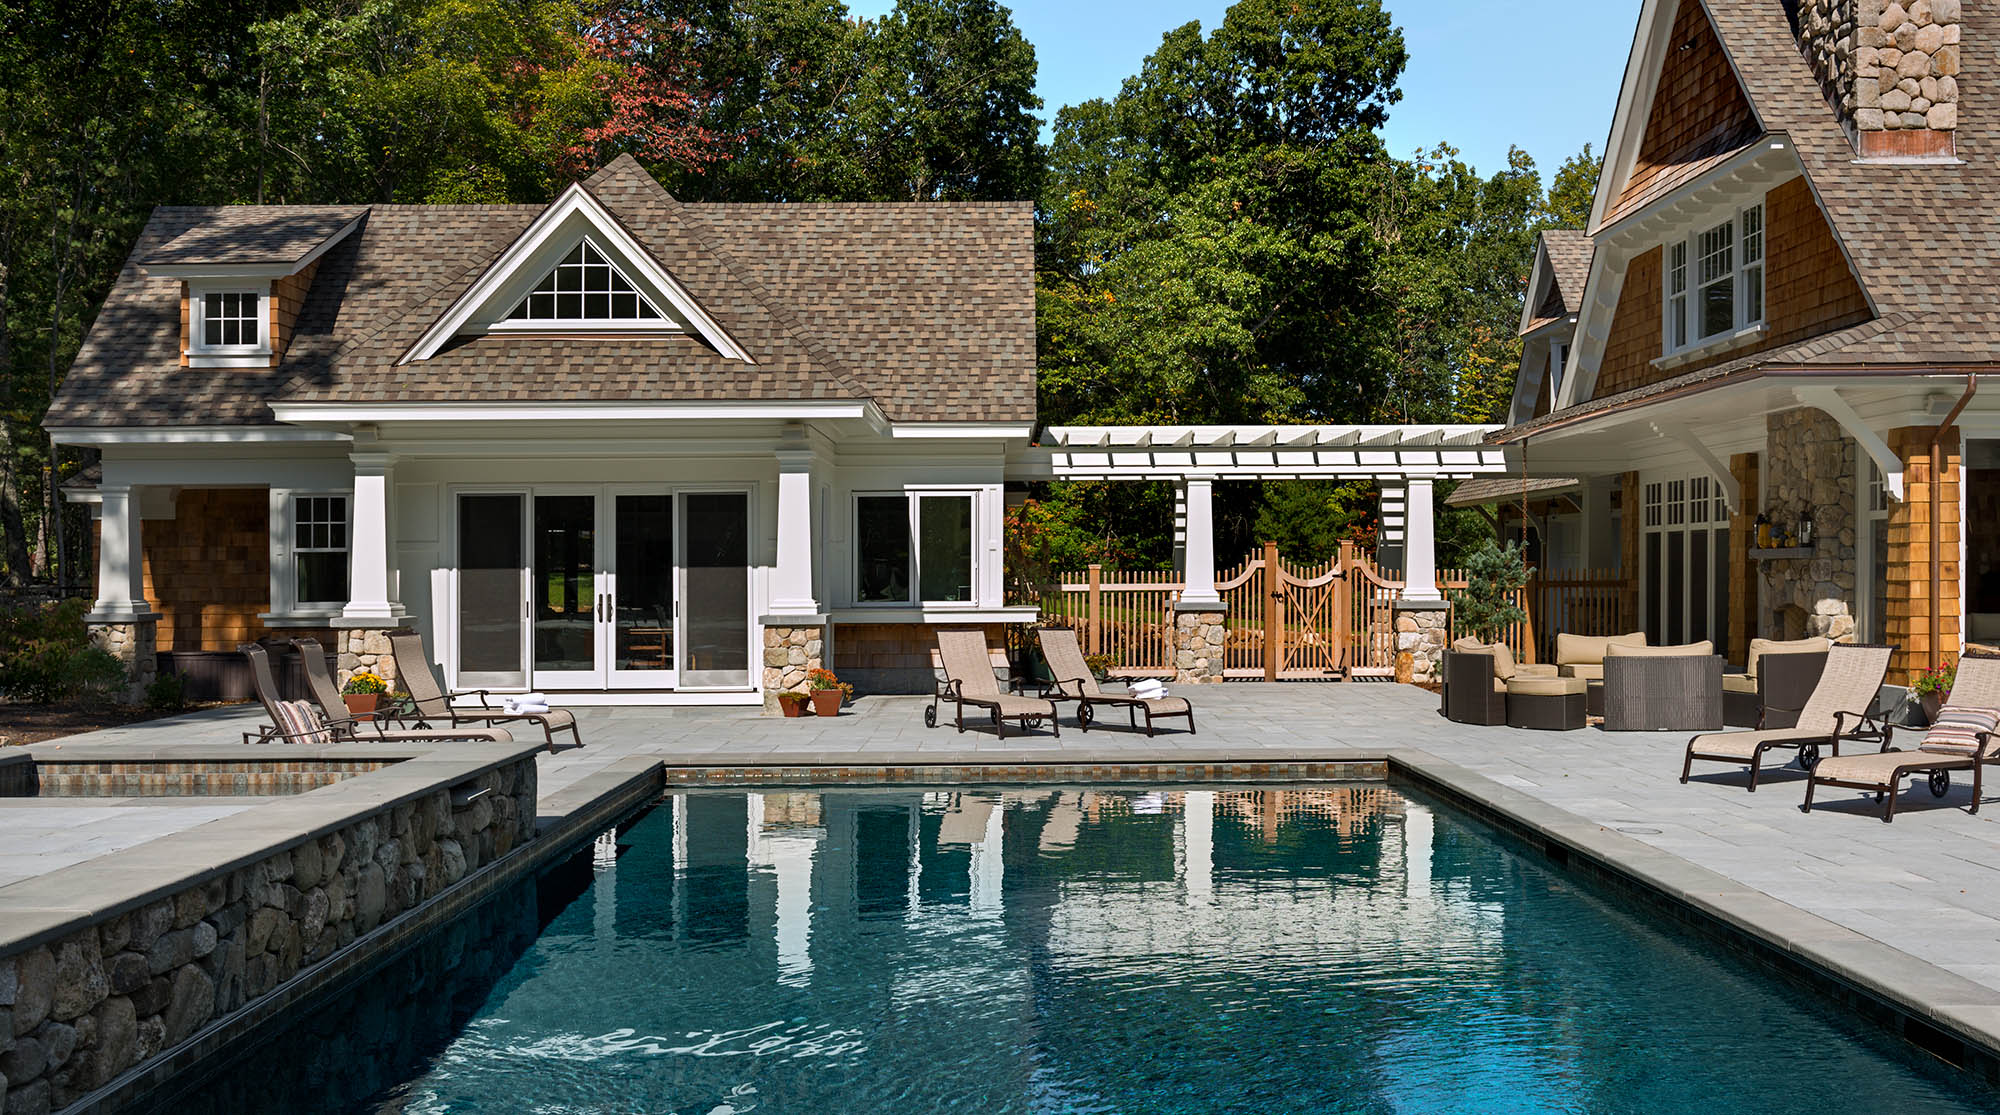 POOLHOUSES, MUDROOMS, PORCHES & ENTRIES